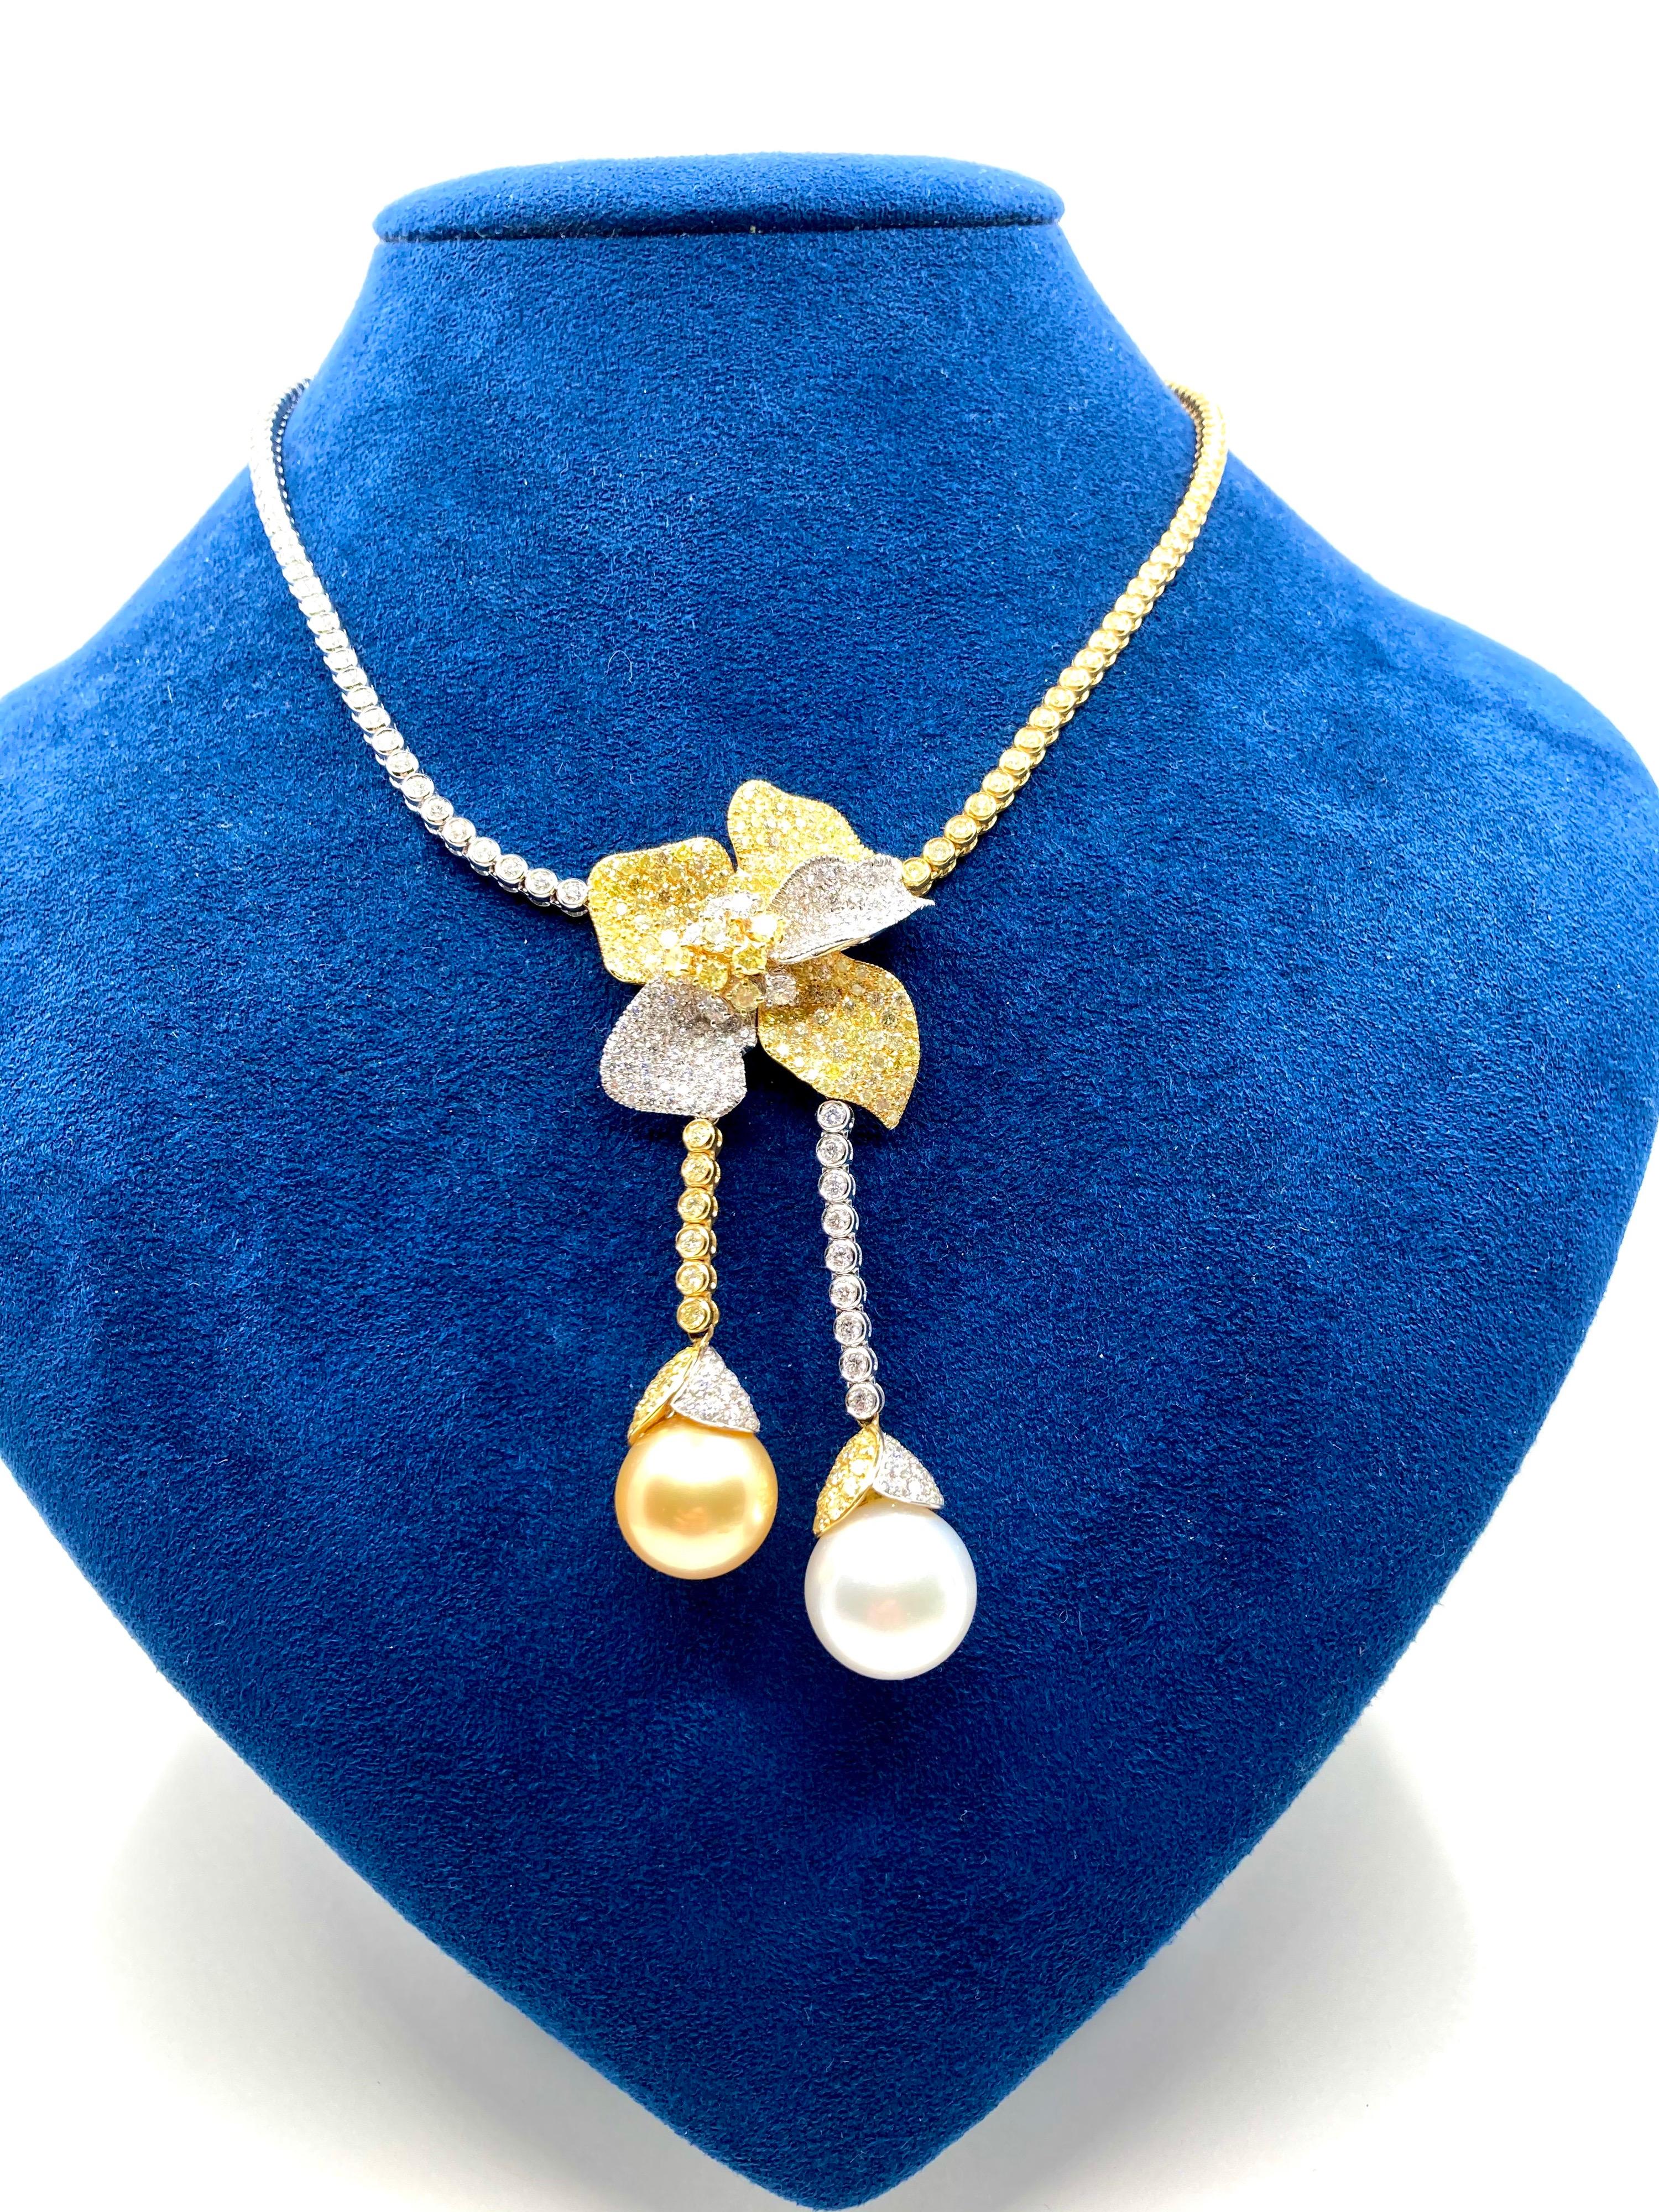 Exclusive 18 Karat White and Yellow Gold South Sea Pearl and Diamonds Necklace For Sale 1